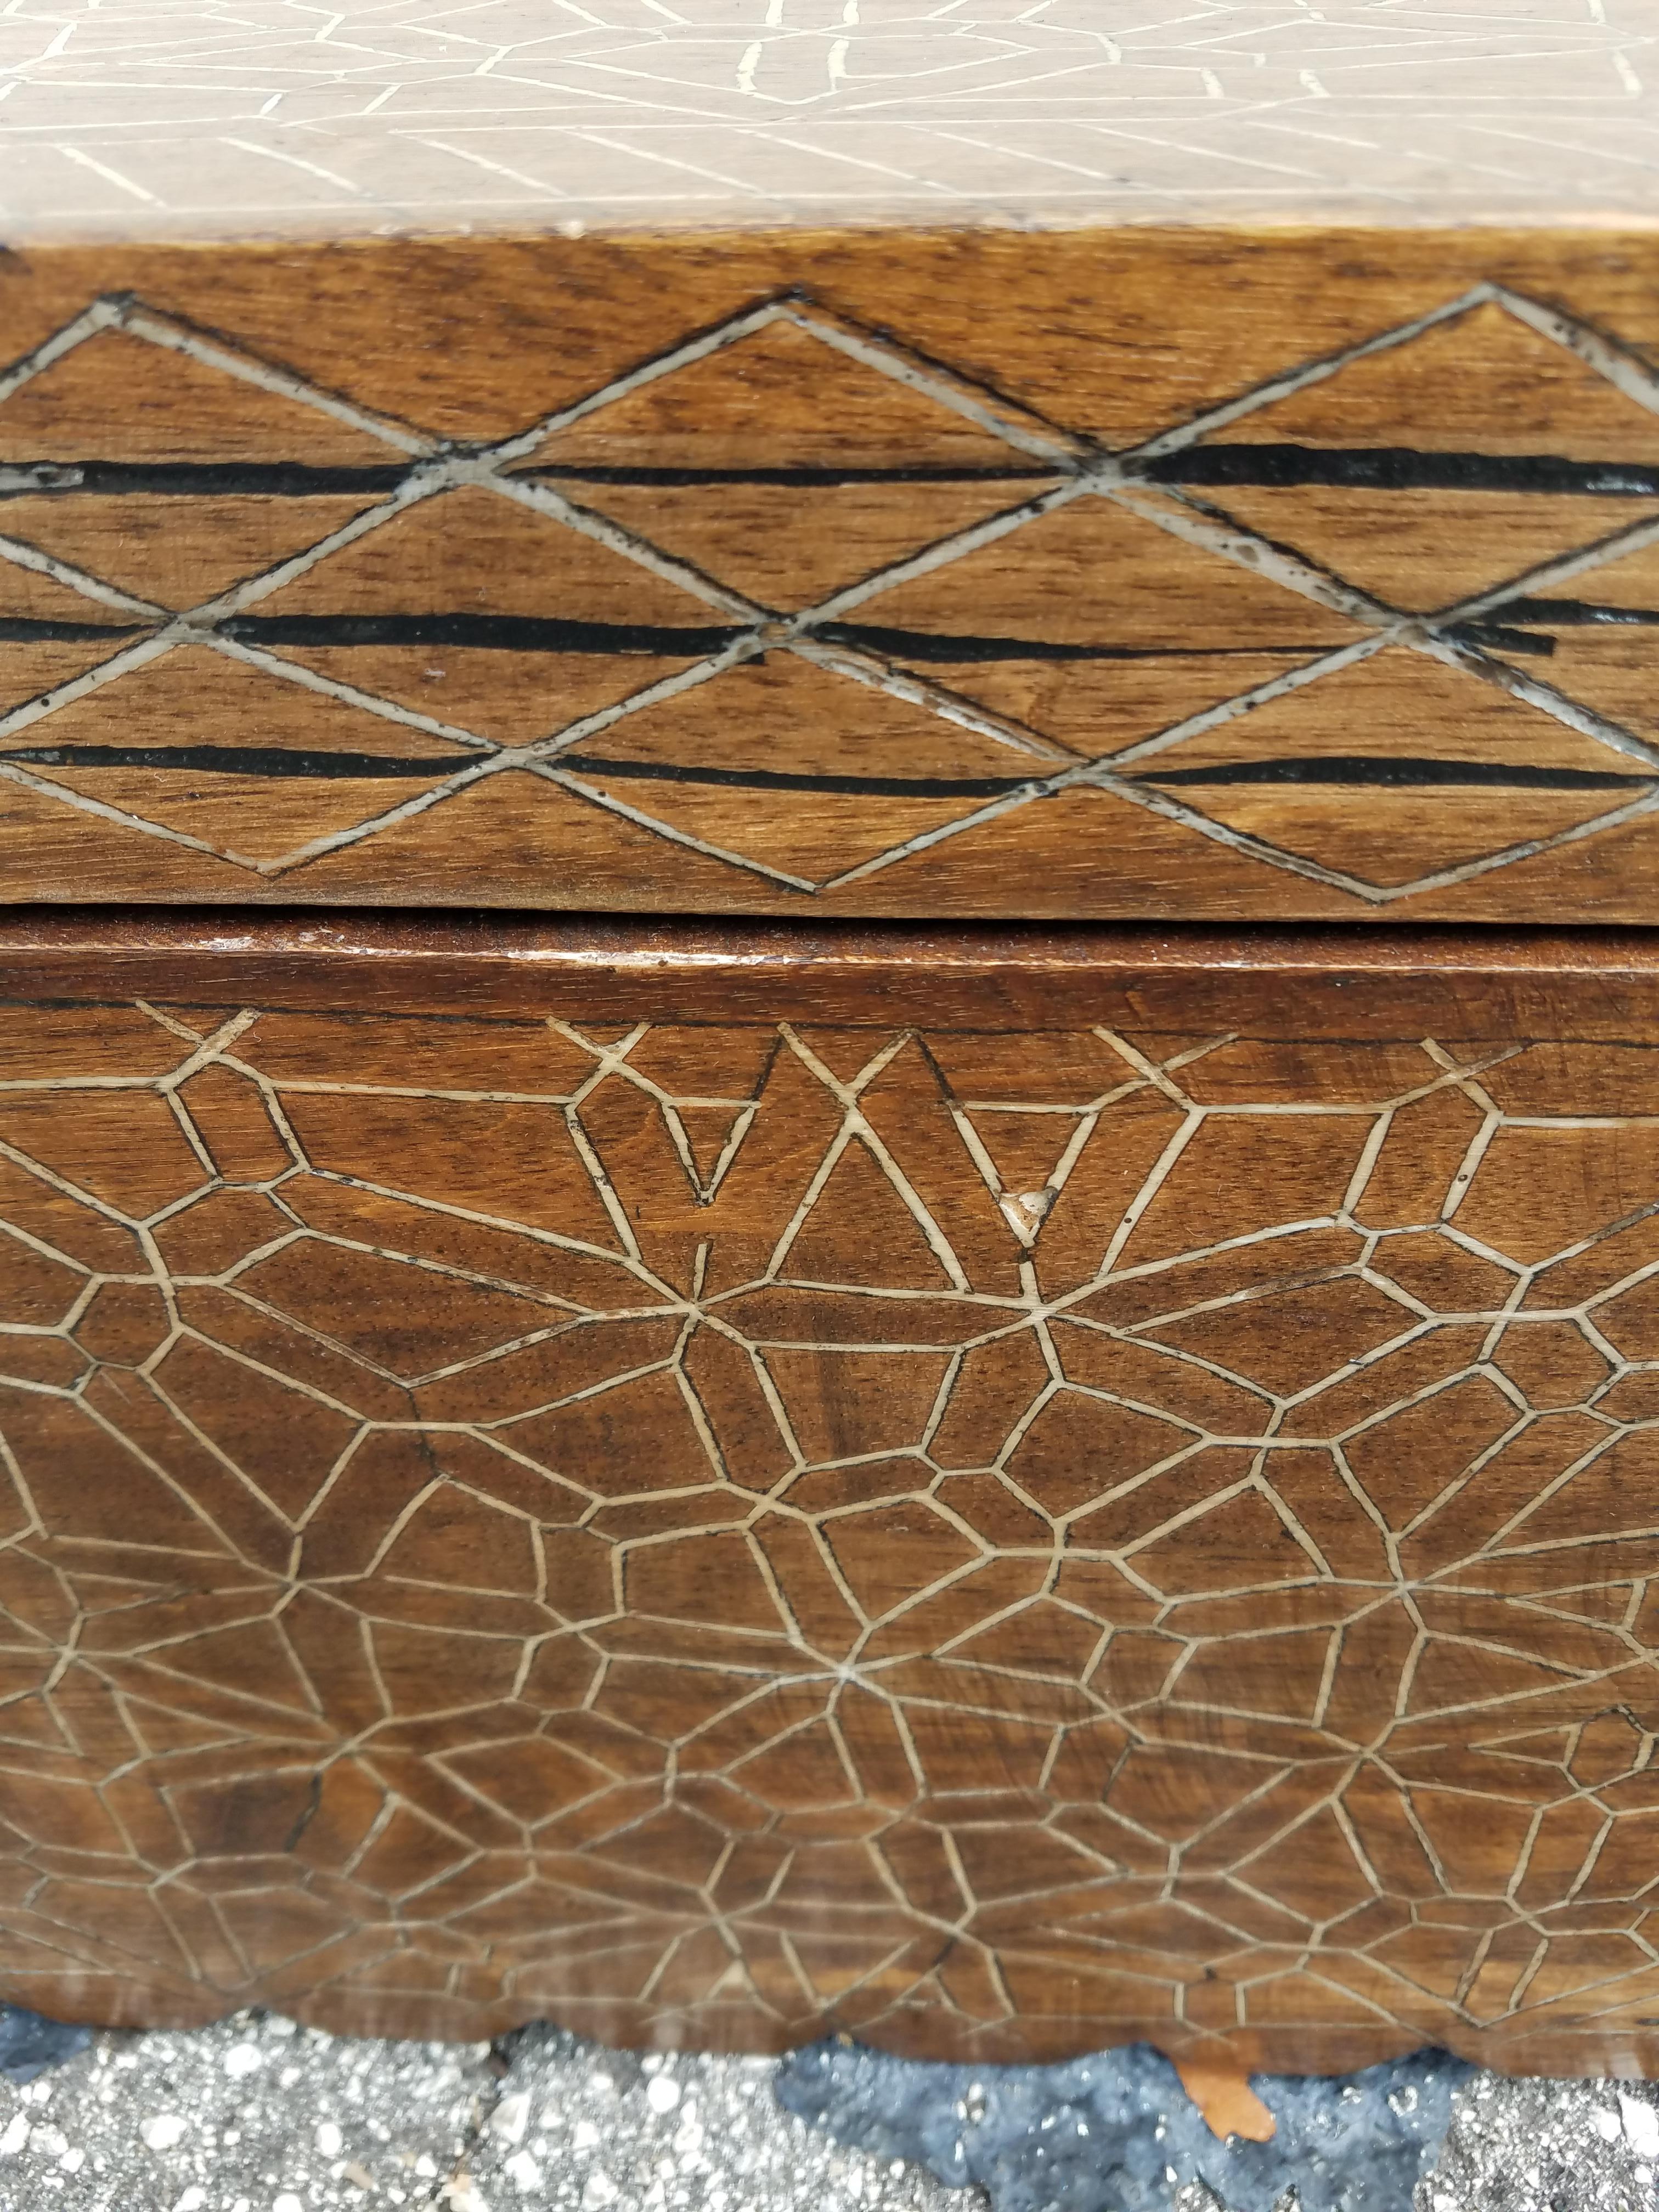 We carry a wide range of beautiful Moroccan trunks. This one is a very solid Cedar wood trunk, with some storage space, and can be used as an aquarium support base, blanket chest, or just Stand alone as a show piece. Amazing carvings throughout as